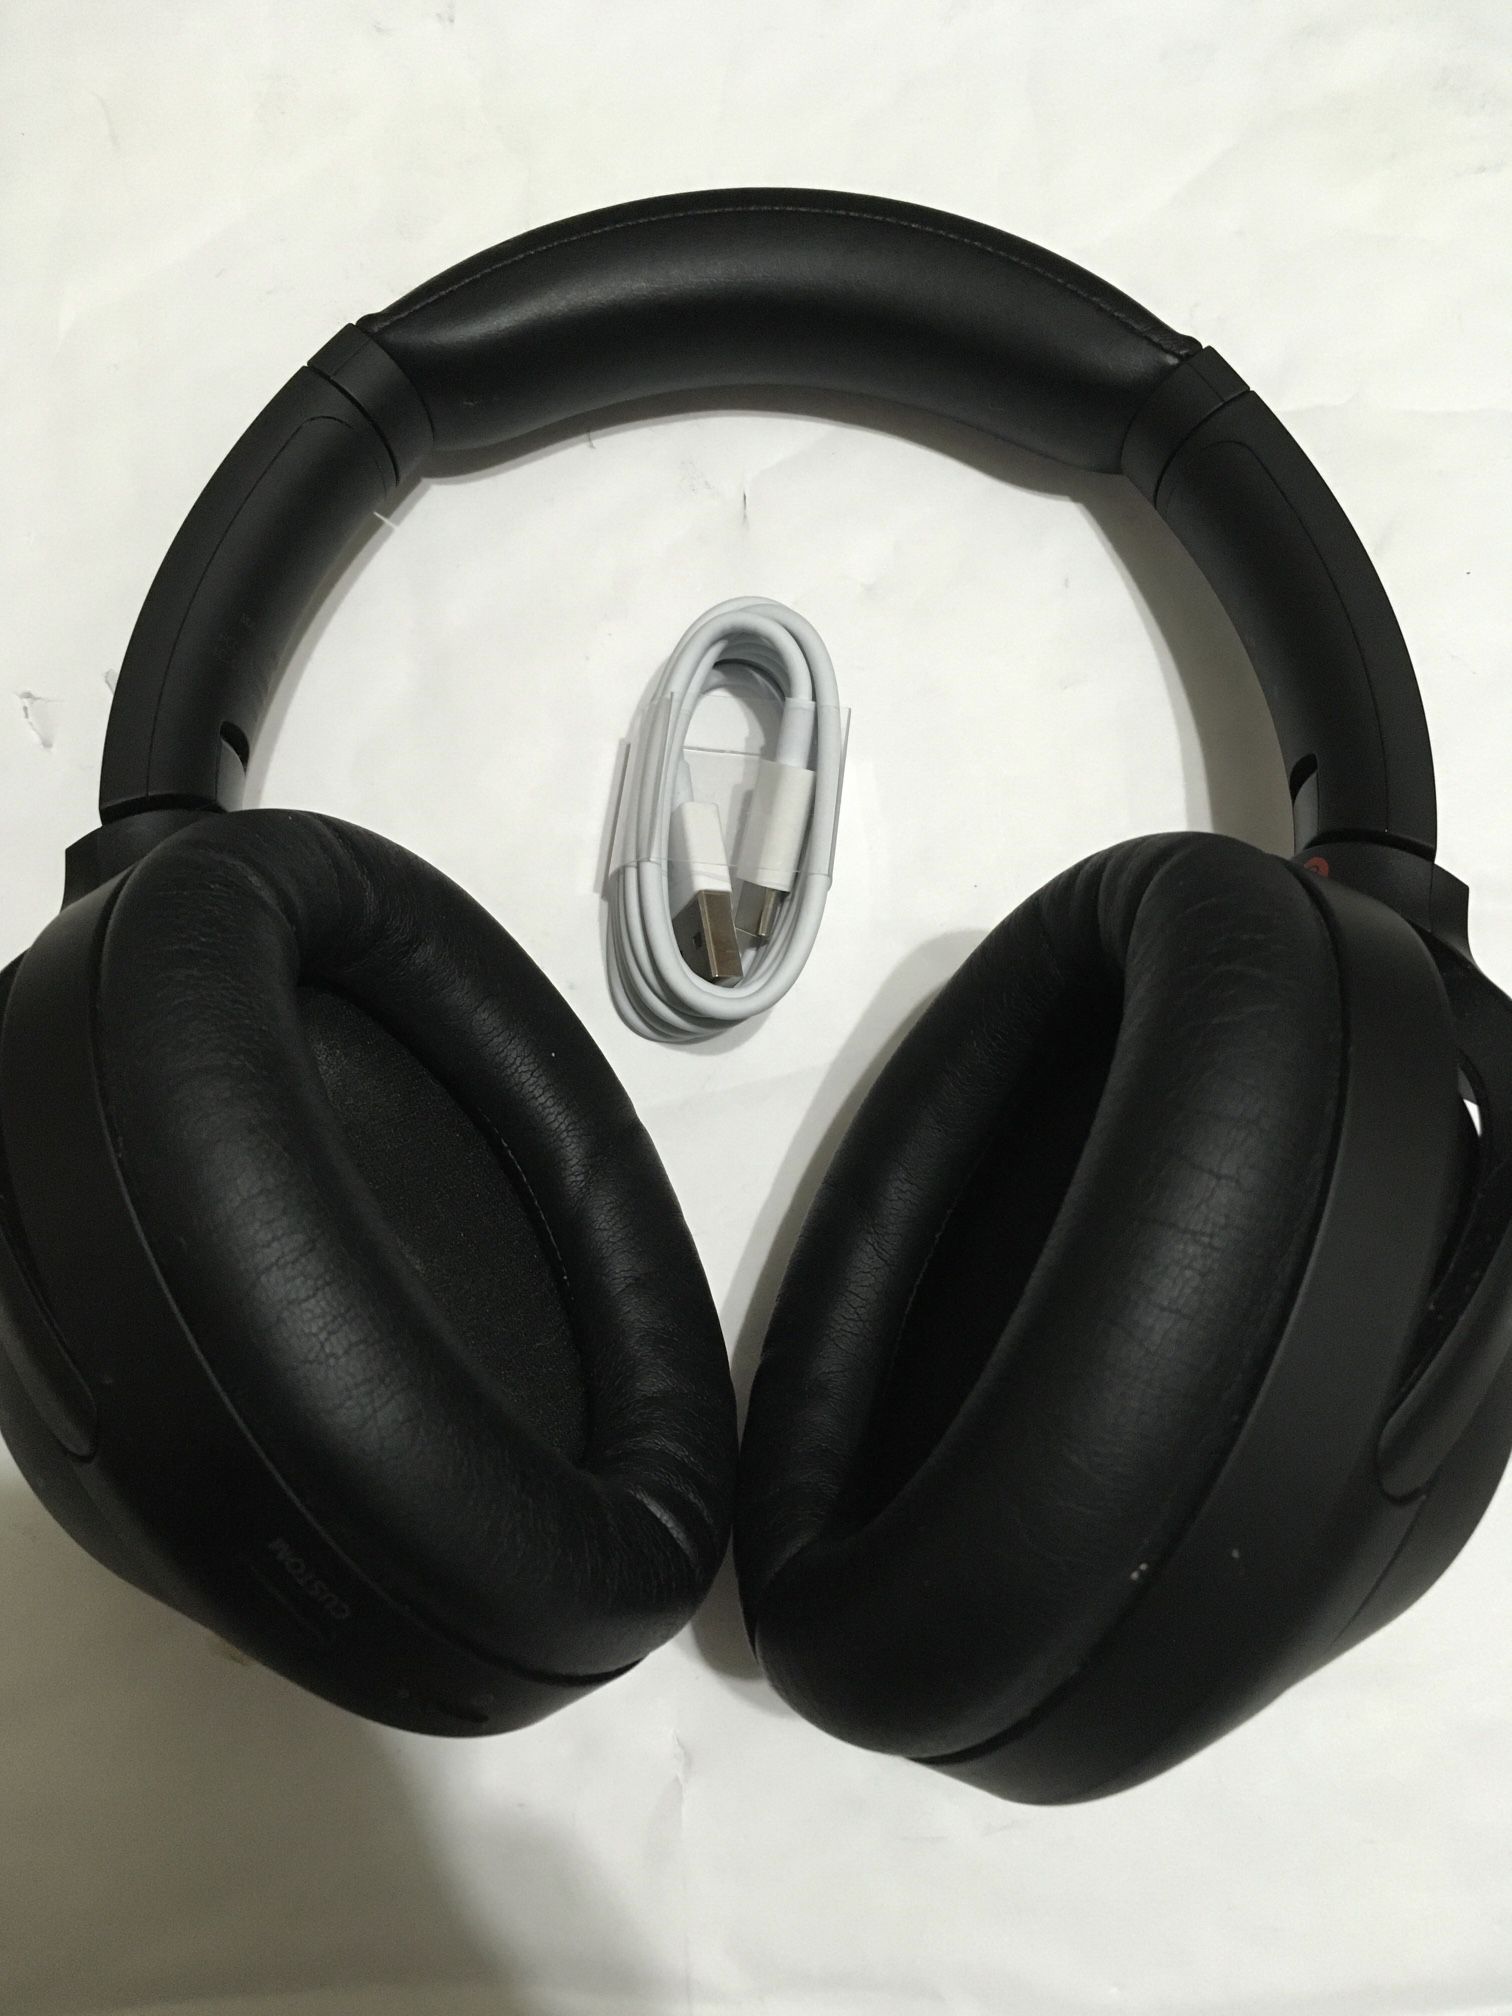  Sony WH-1000XM4 Wireless Over-Ear Active Noise Canceling Headphones- Black   Comes with charging cable . In good working condition   Noise-canceling 